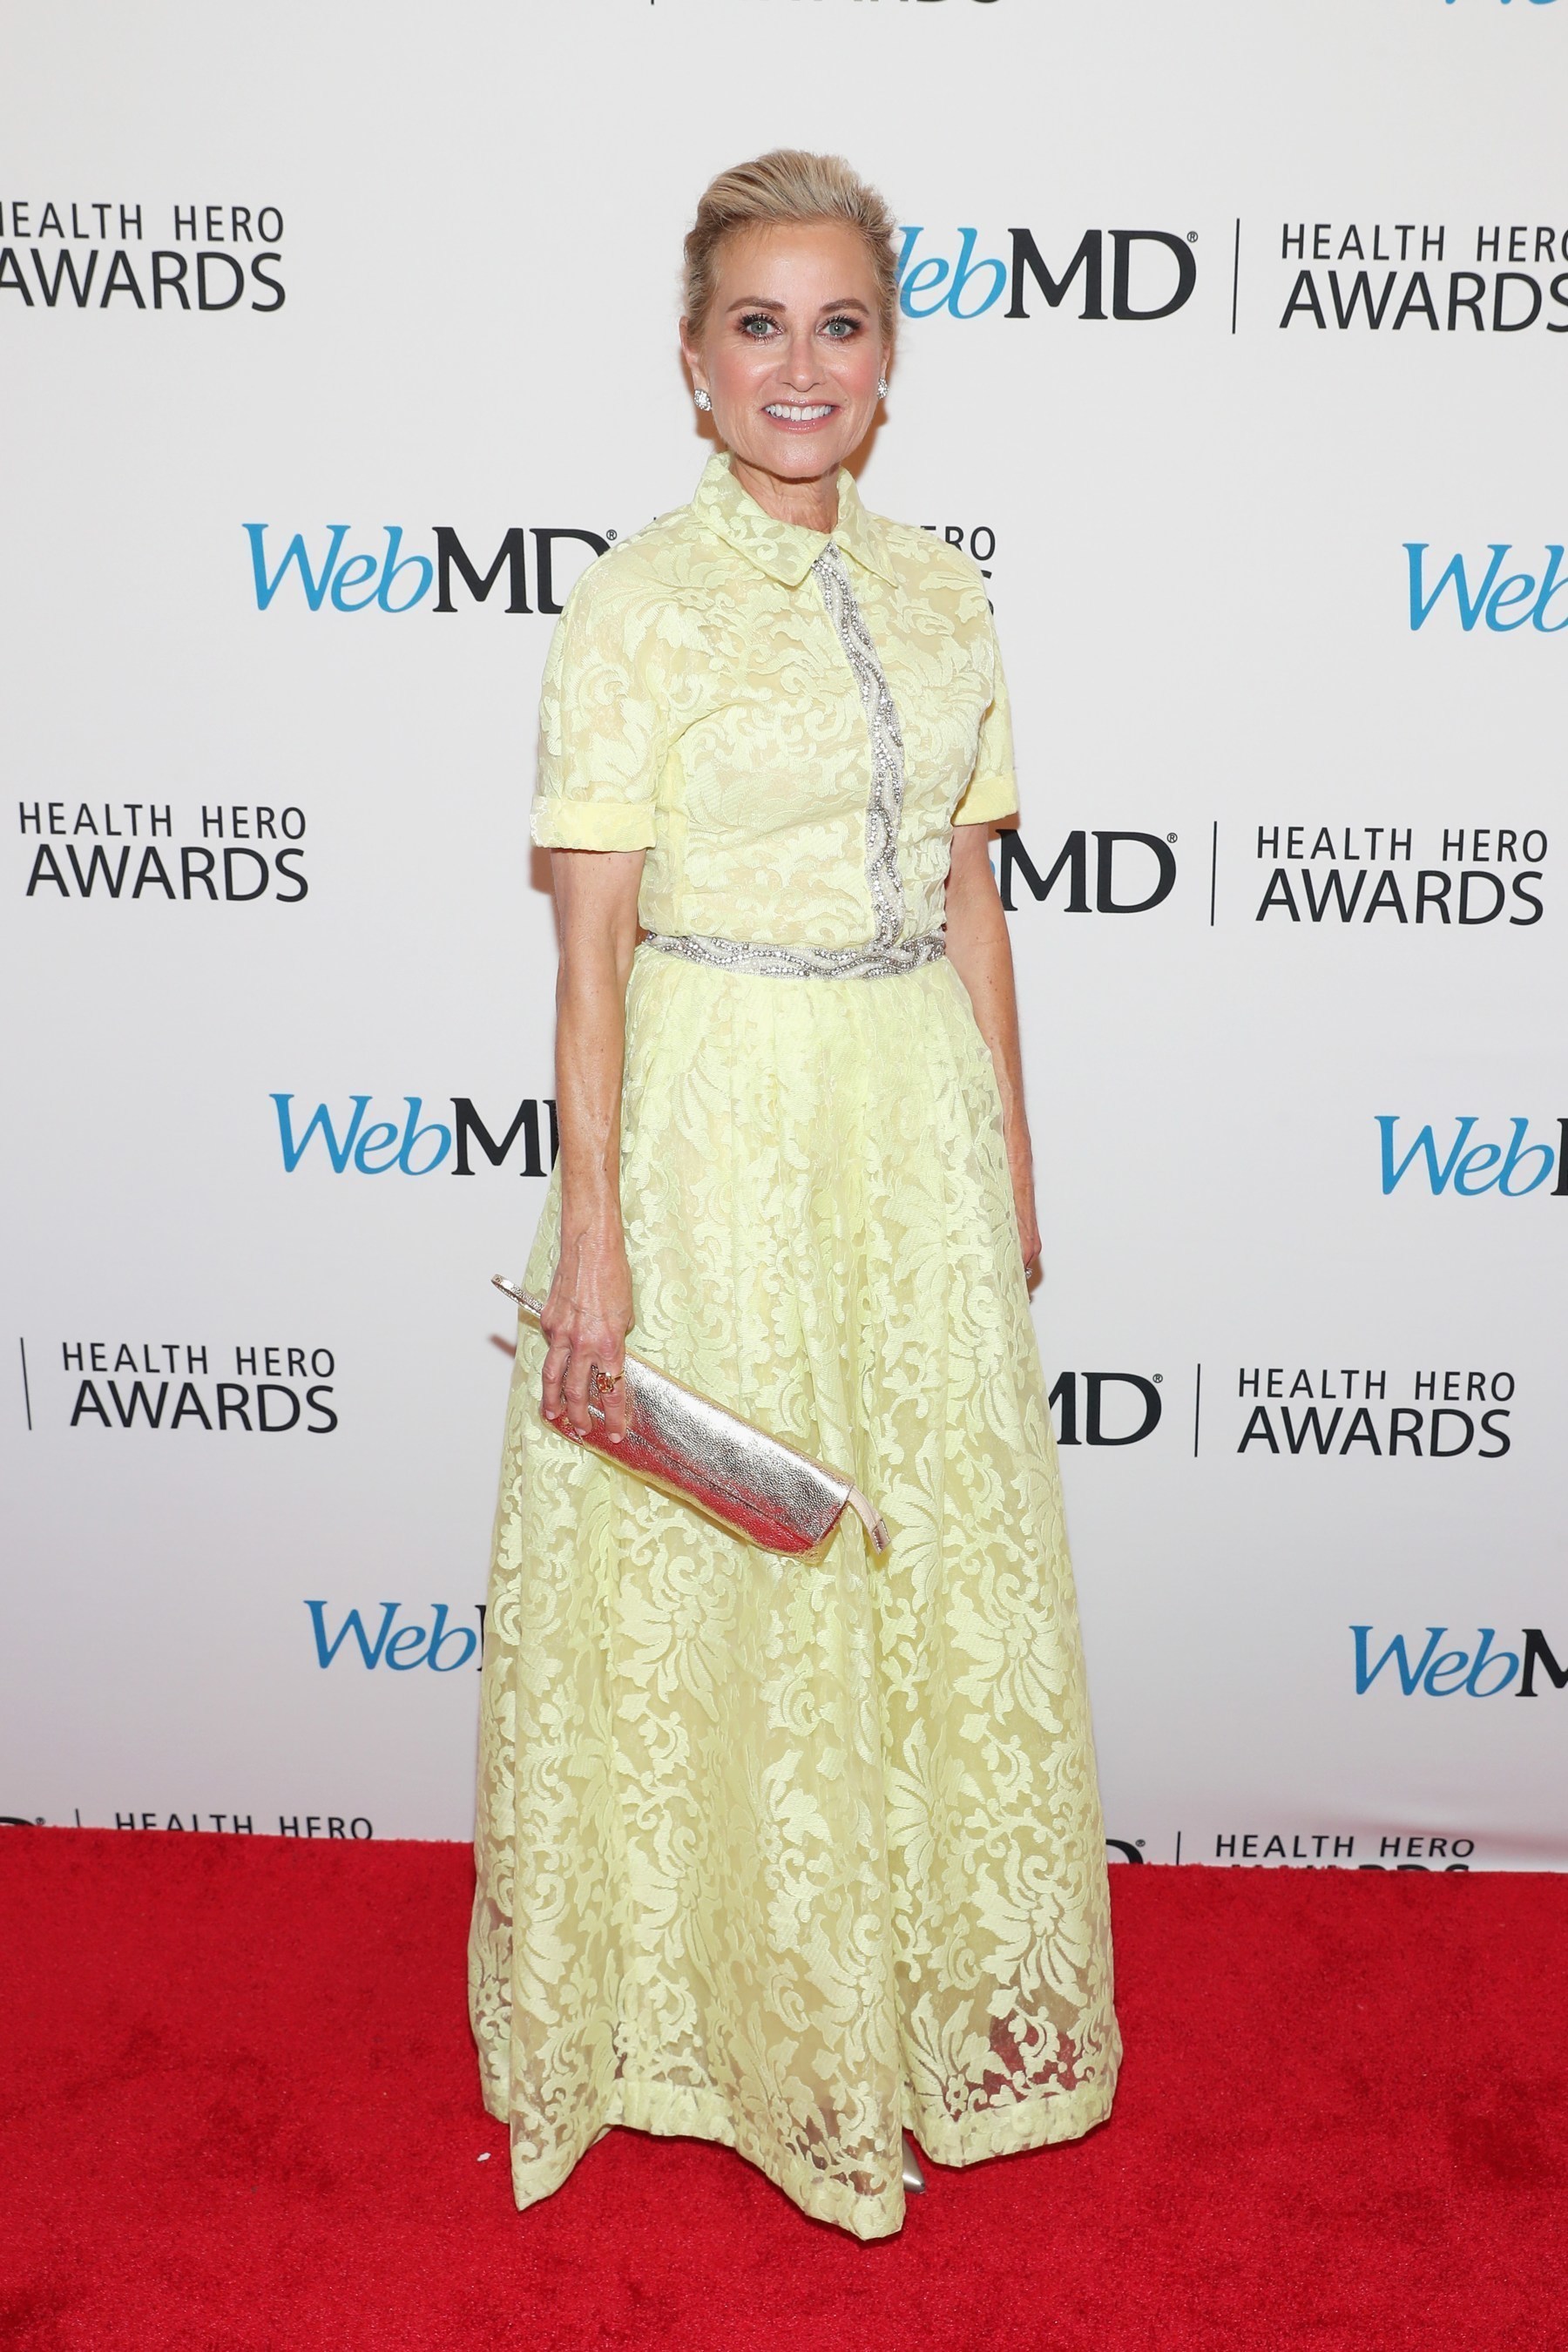 Maureen McCormick attends the  2016 WebMD Health Heroes Awards on November 3, 2016 in New York City.